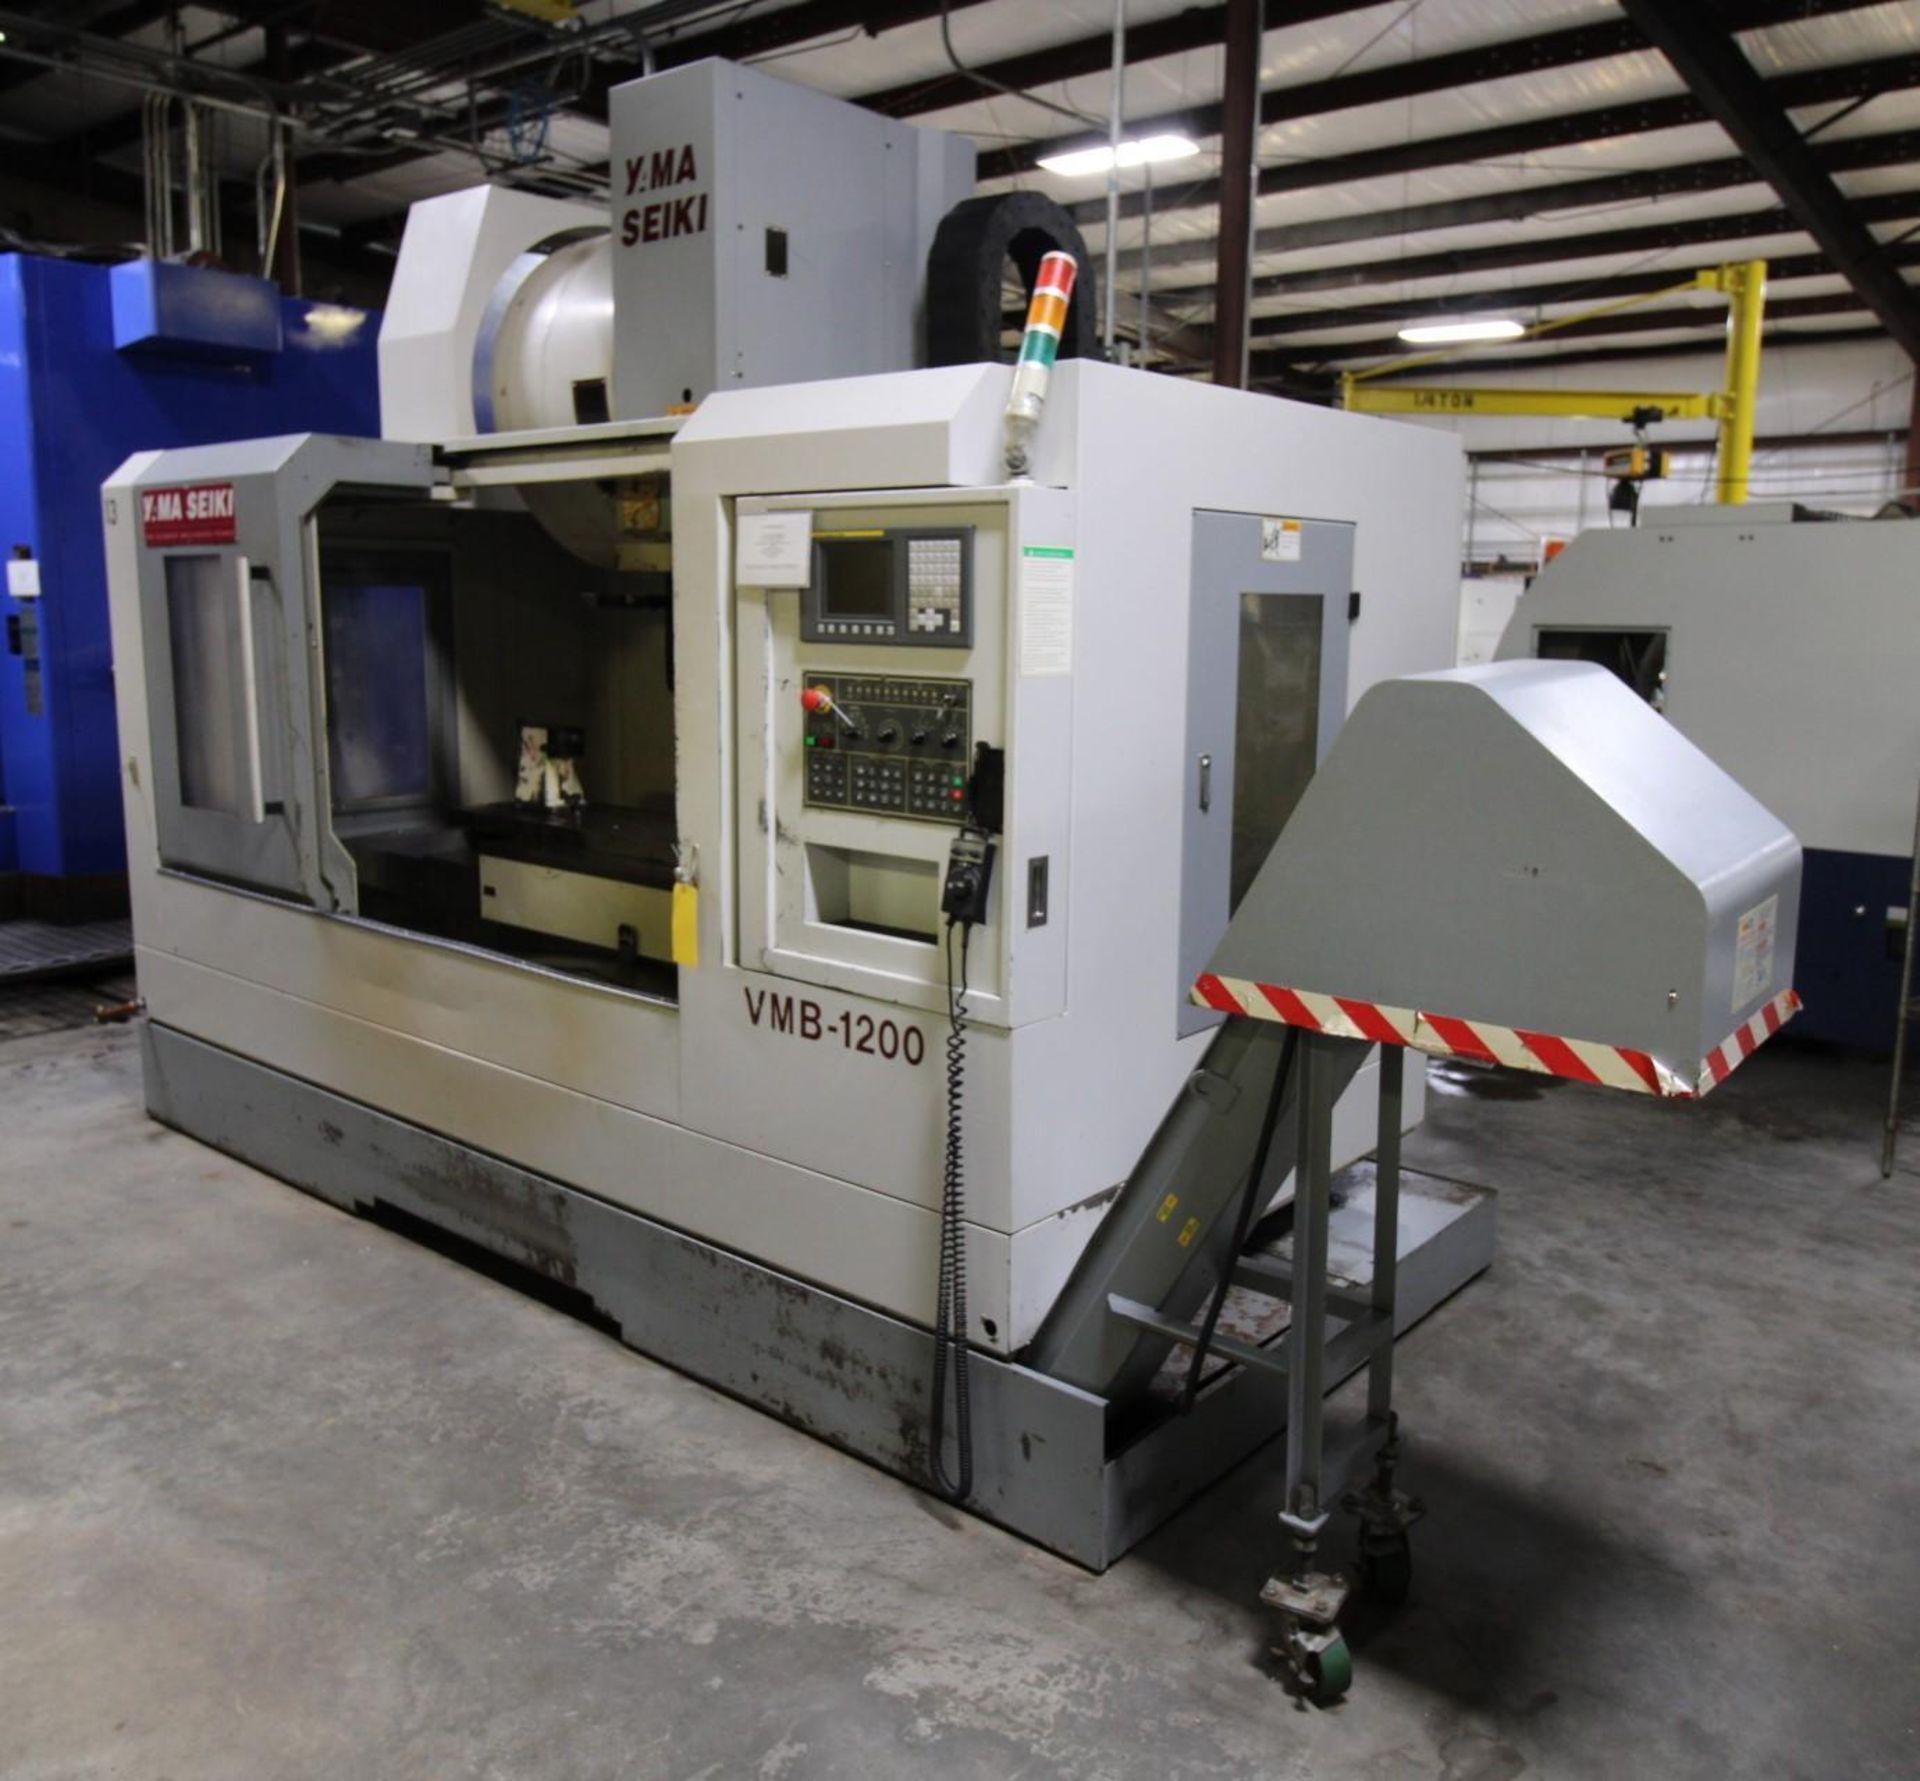 4-AXIS VERTICAL MACHINING CENTER, YAMA SEIKI MDL. VMB-1200, new 2006, installed new 2007, Fanuc Oi-